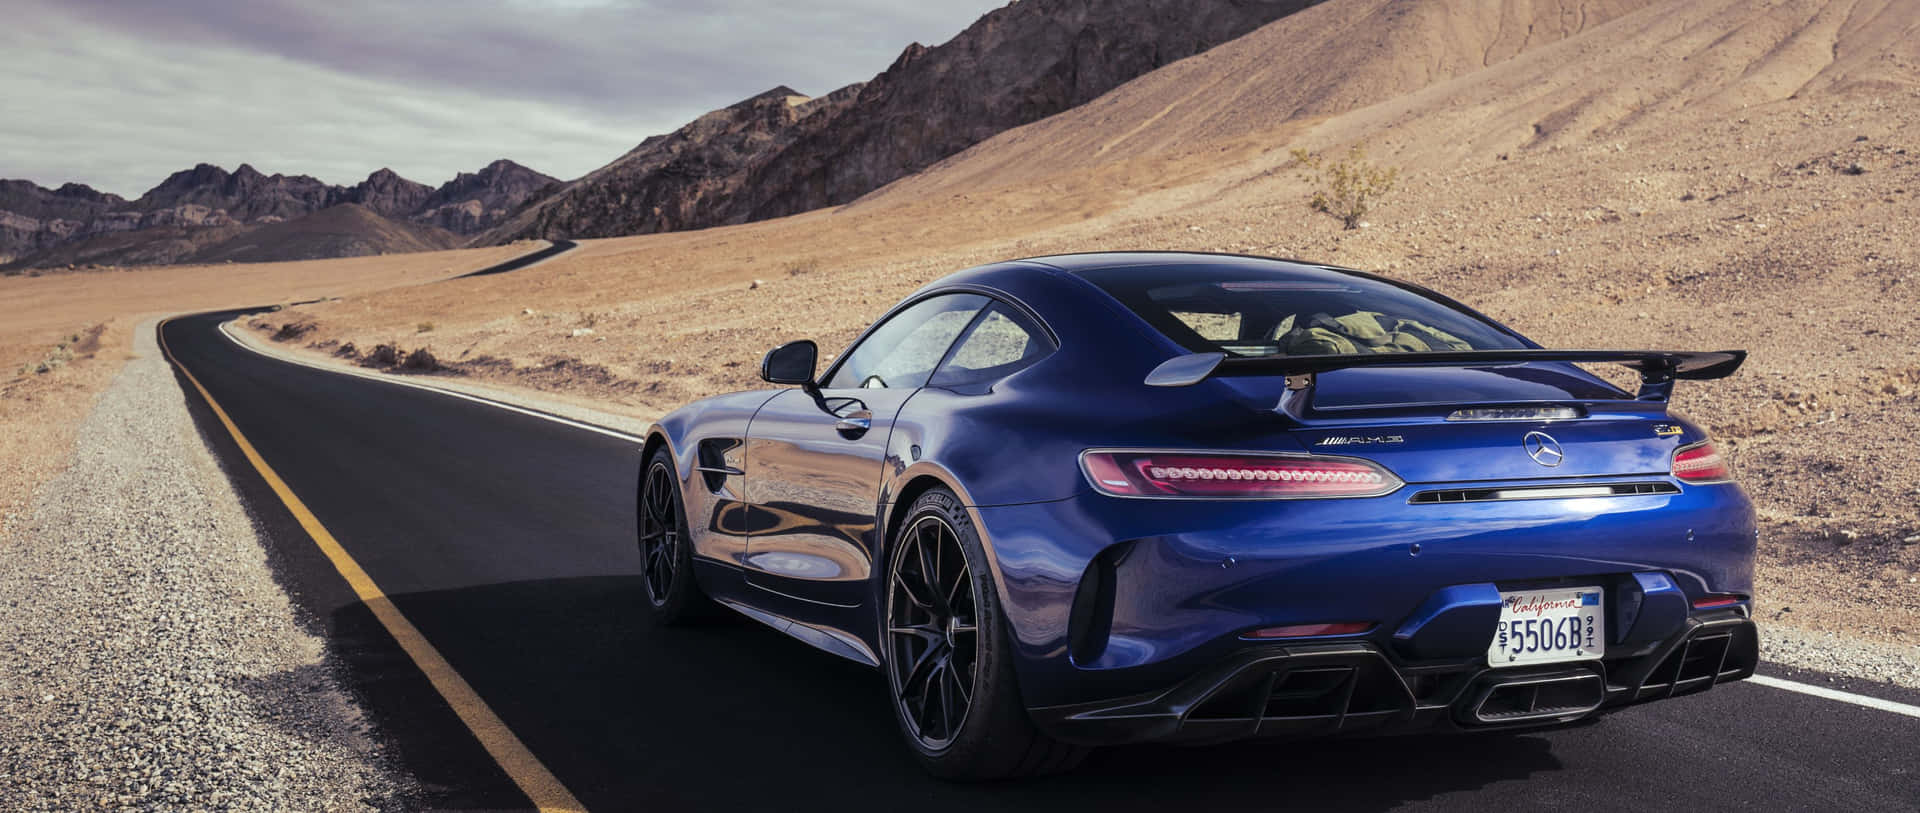 Blue Mercedes AMG GT On The Highway Wallpaper